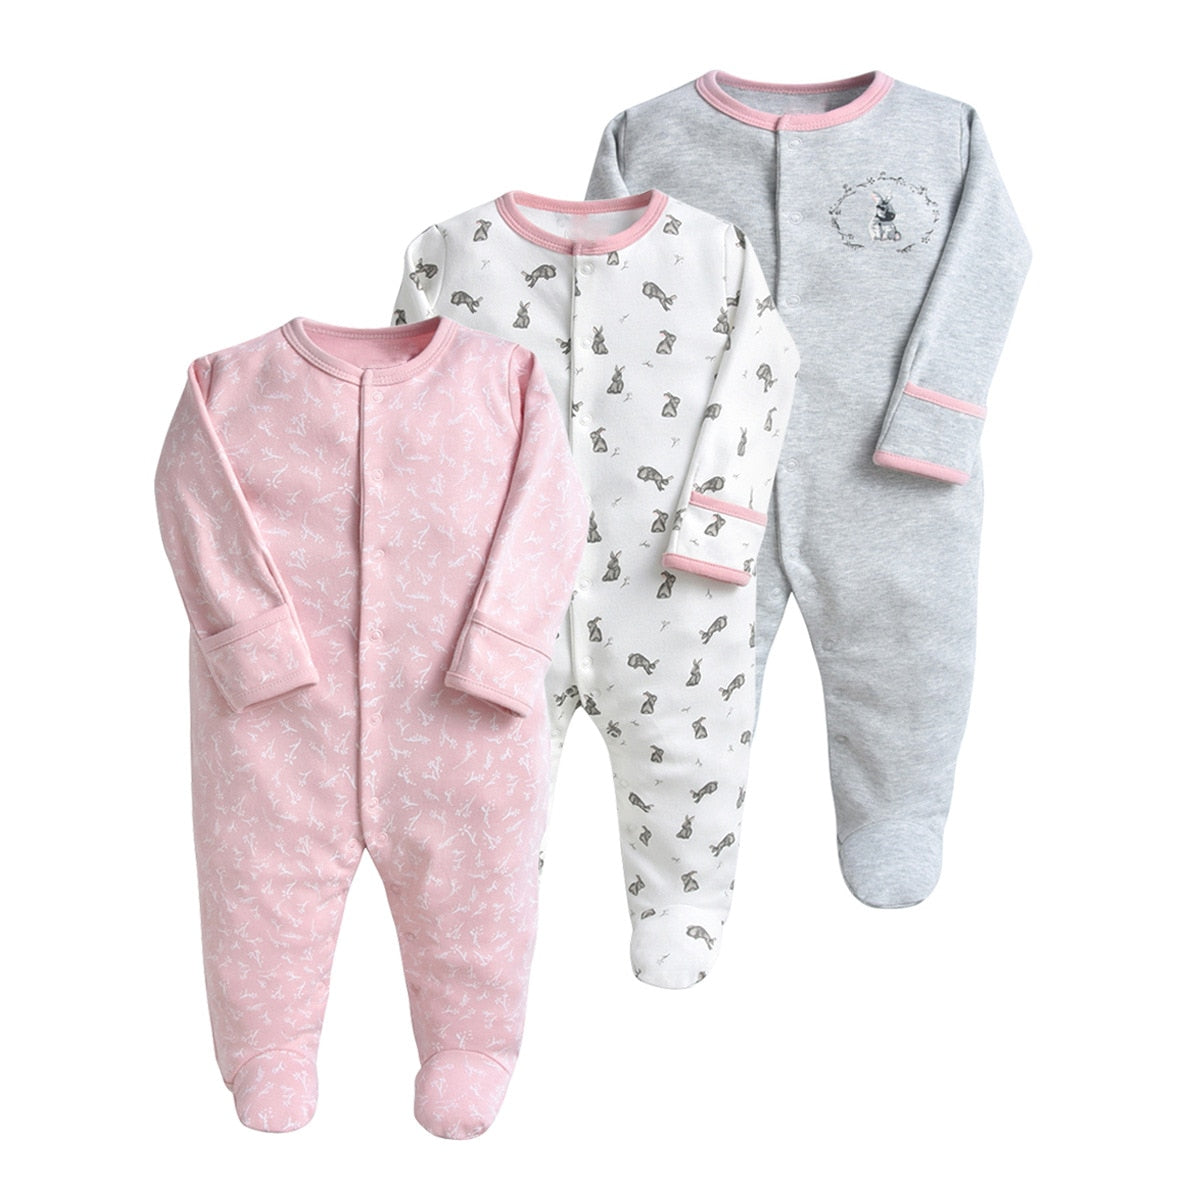 3 Pcs/Lot Newborn Jumpsuit Baby Rompers Long Sleeve Infant Clothing Cotton Baby Boys Girls Clothes 0-12Months Ropa Bebe